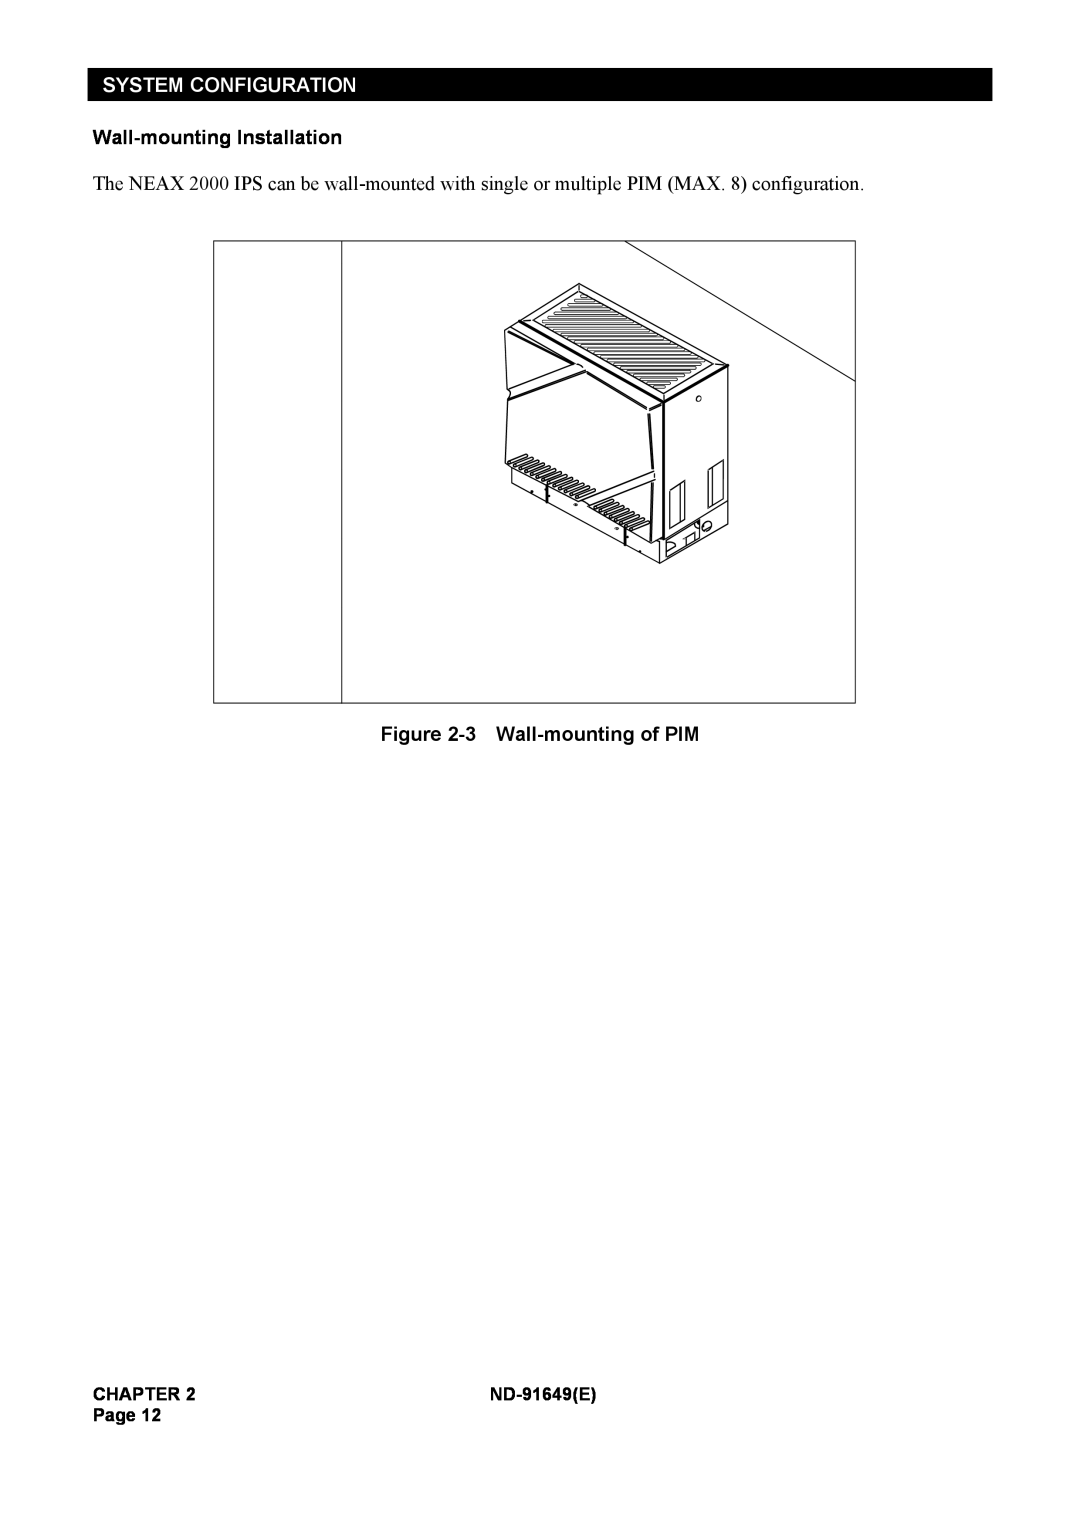 NEC manual System Configuration, Wall-mounting Installation, 3 Wall-mounting of PIM, Chapter, ND-91649E, Page 